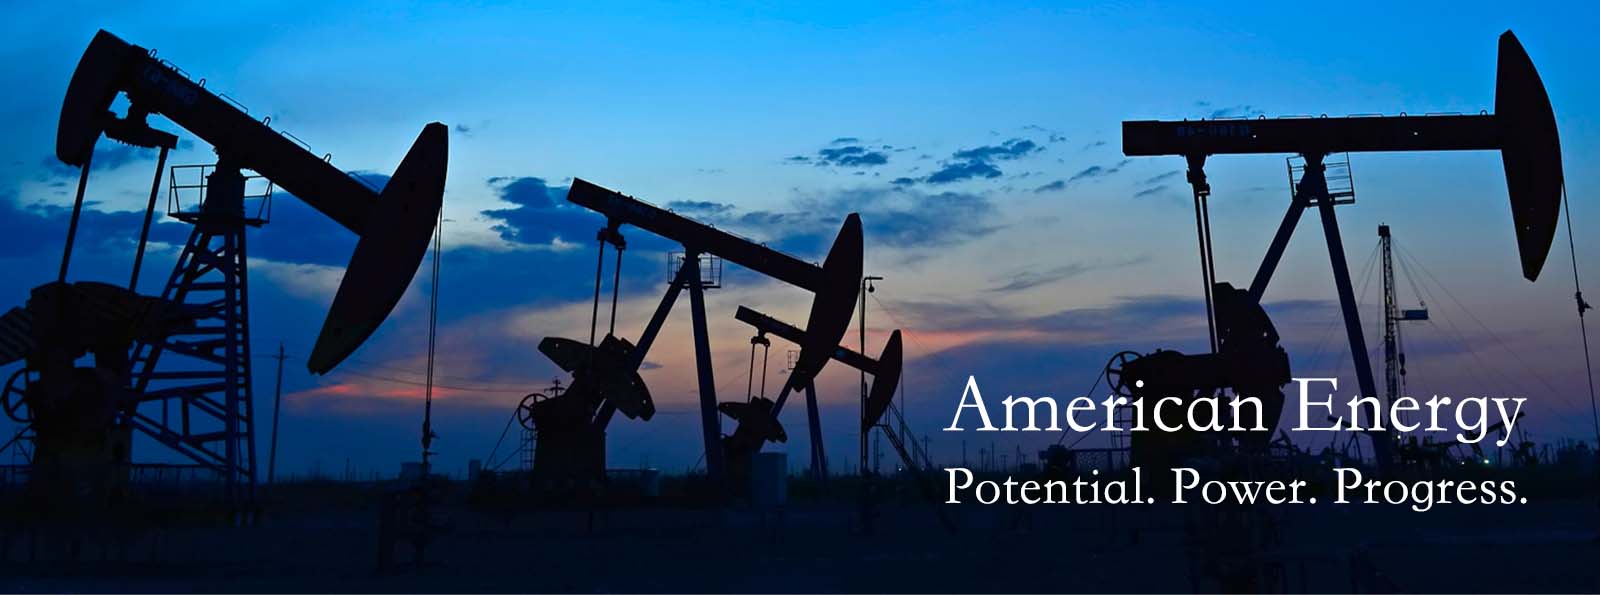 acFarlane Company USA is an independent oil and natural gas company